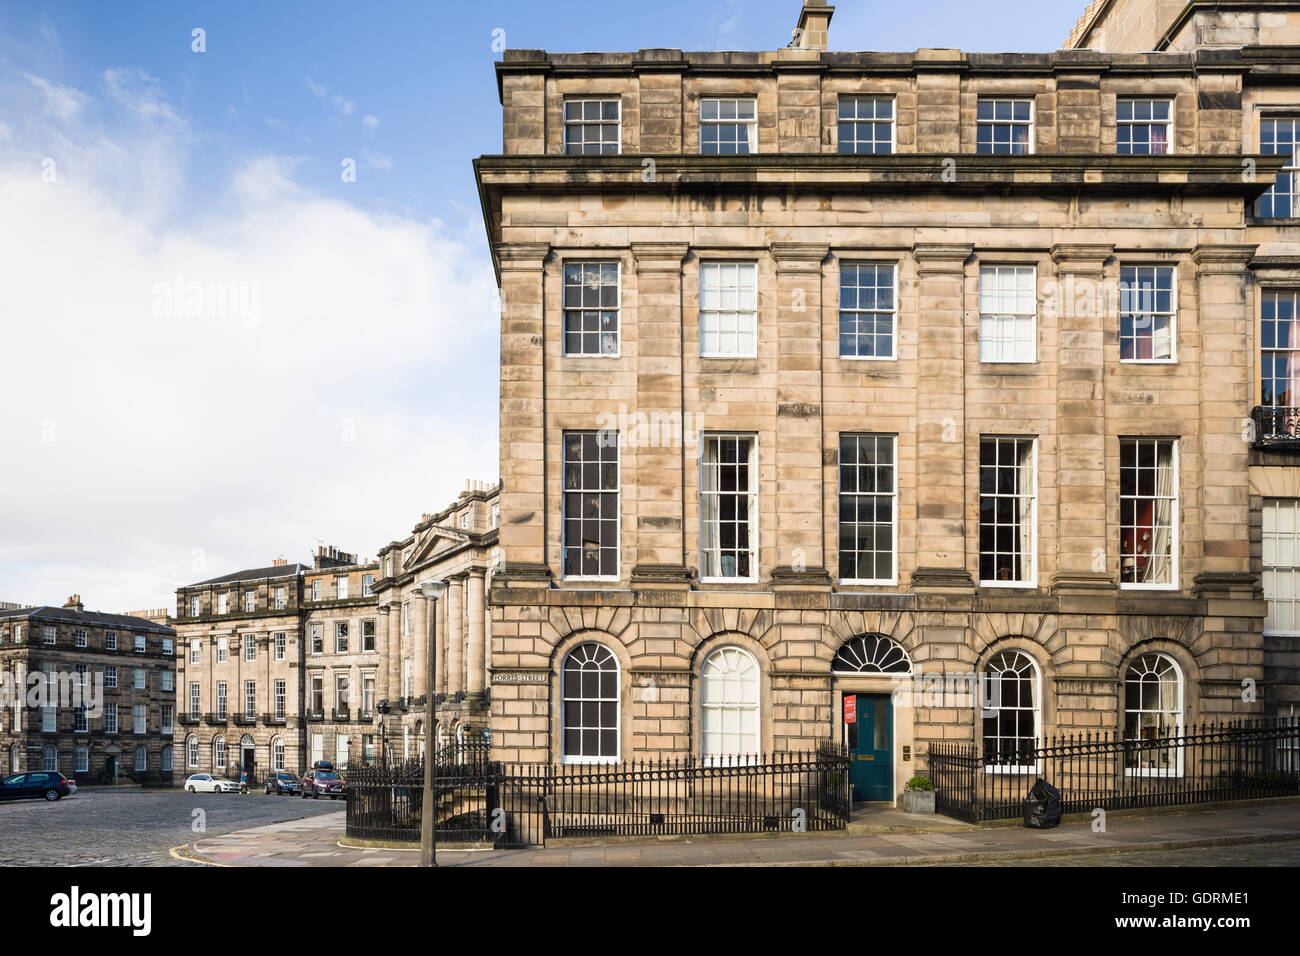 Moray Place in the New Town of Edinburgh, designed as a harmonious layout by James Gillespie Graham in 1822. Stock Photo